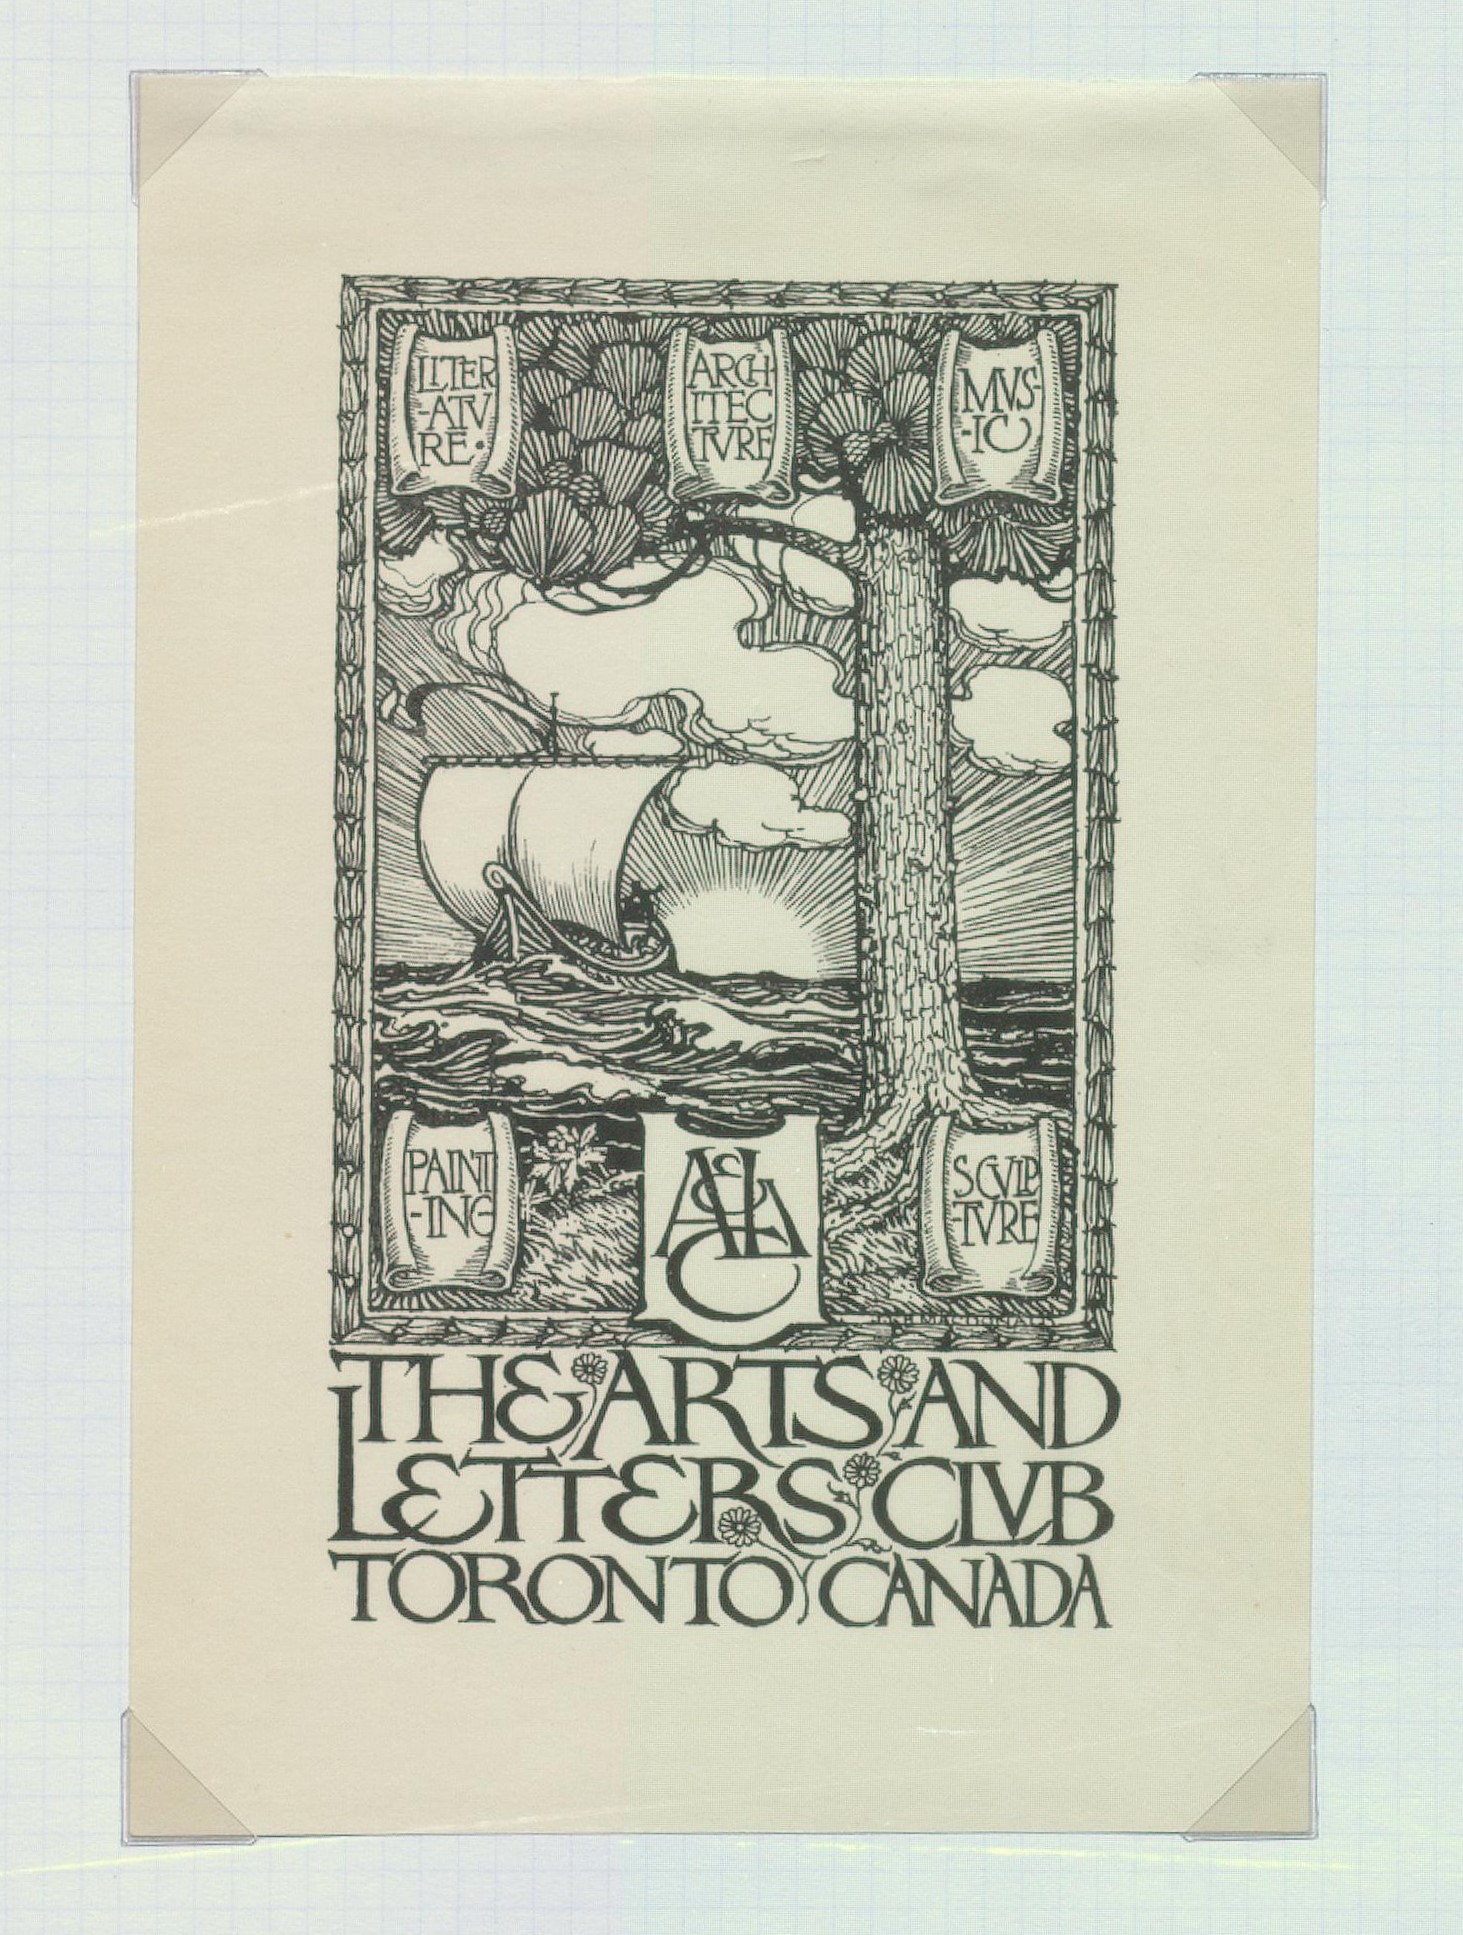 A pale tan book cover with a wavy, rust-coloured border at its edge; provincial crests down the left and right sides, also in rust. A rectangle in the center is topped with stylized, alternating maple leaves and pine branches with cones. Below them, the title, and below that, a drawing of a shoreline with irises, trilliums, and wild roses. Two crests are in the foreground with a lake behind. Two figures paddle a canoe past an outcrop of rock and the sky is filled with large clouds. A sparse pine tree rises from the shore. “British Empire Exhibition London 1924” is printed at the bottom.